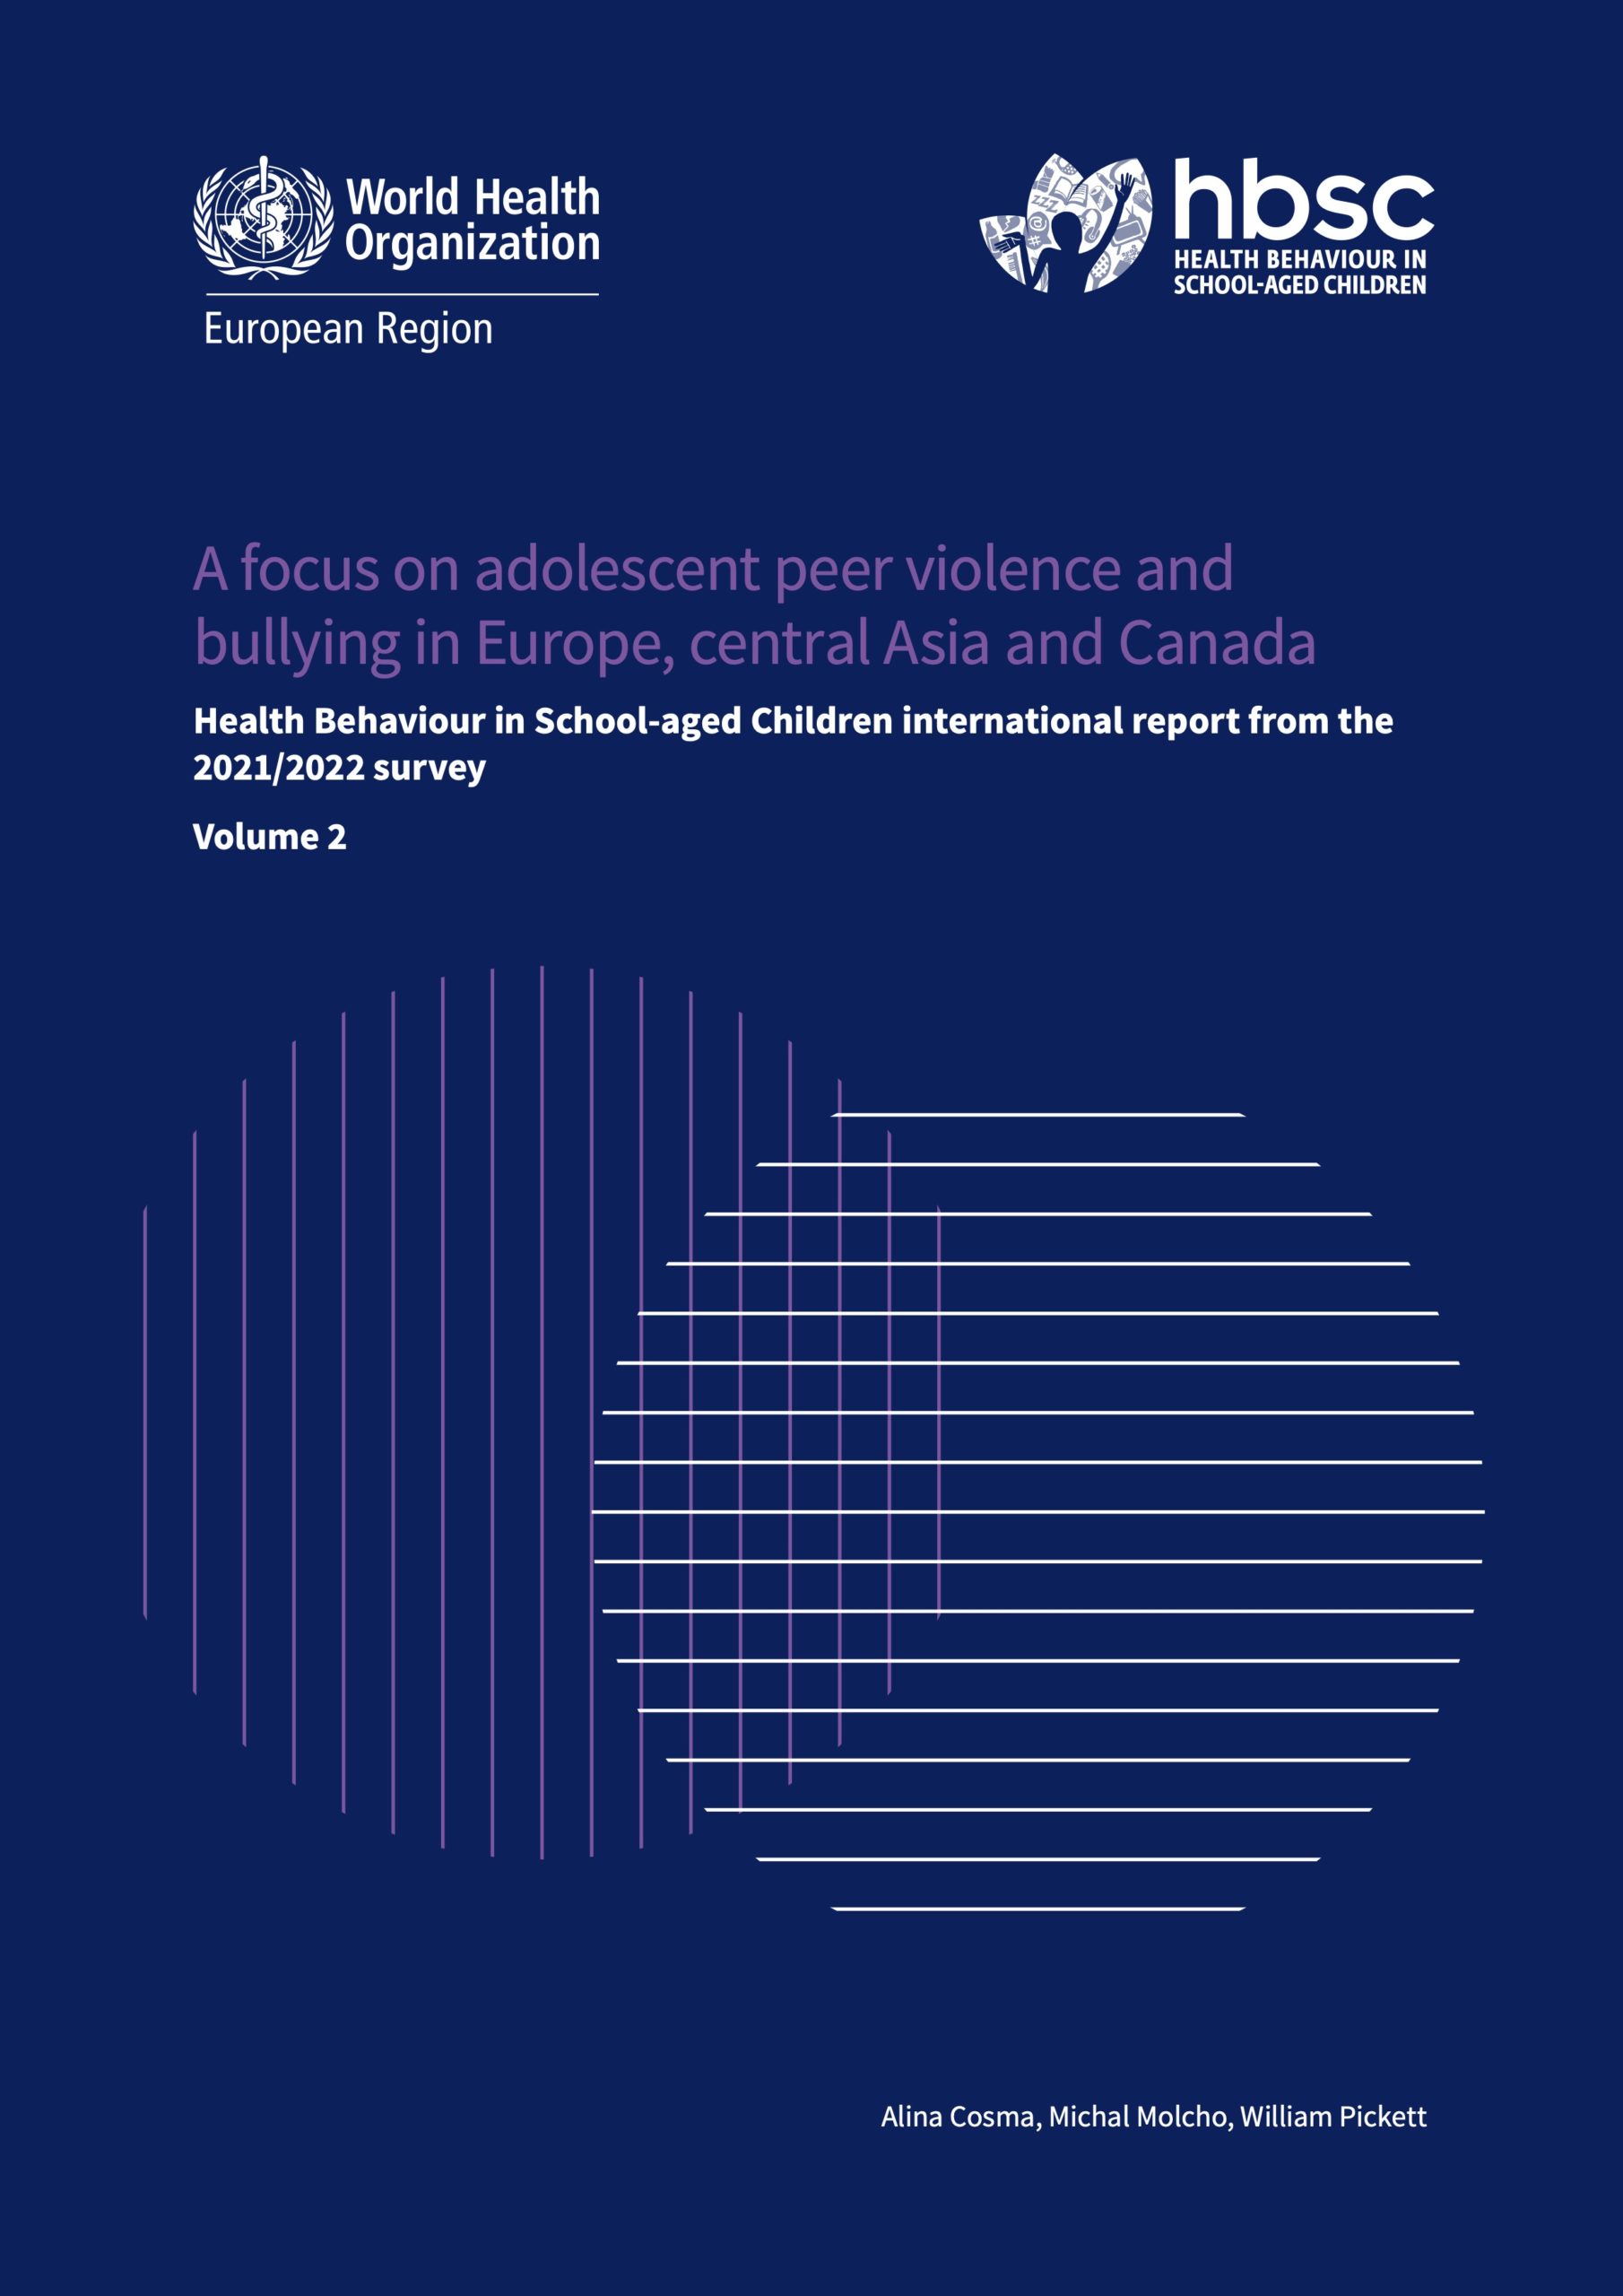 Cover of volume 2. HBSC study second international report volume on bullying and peer violence